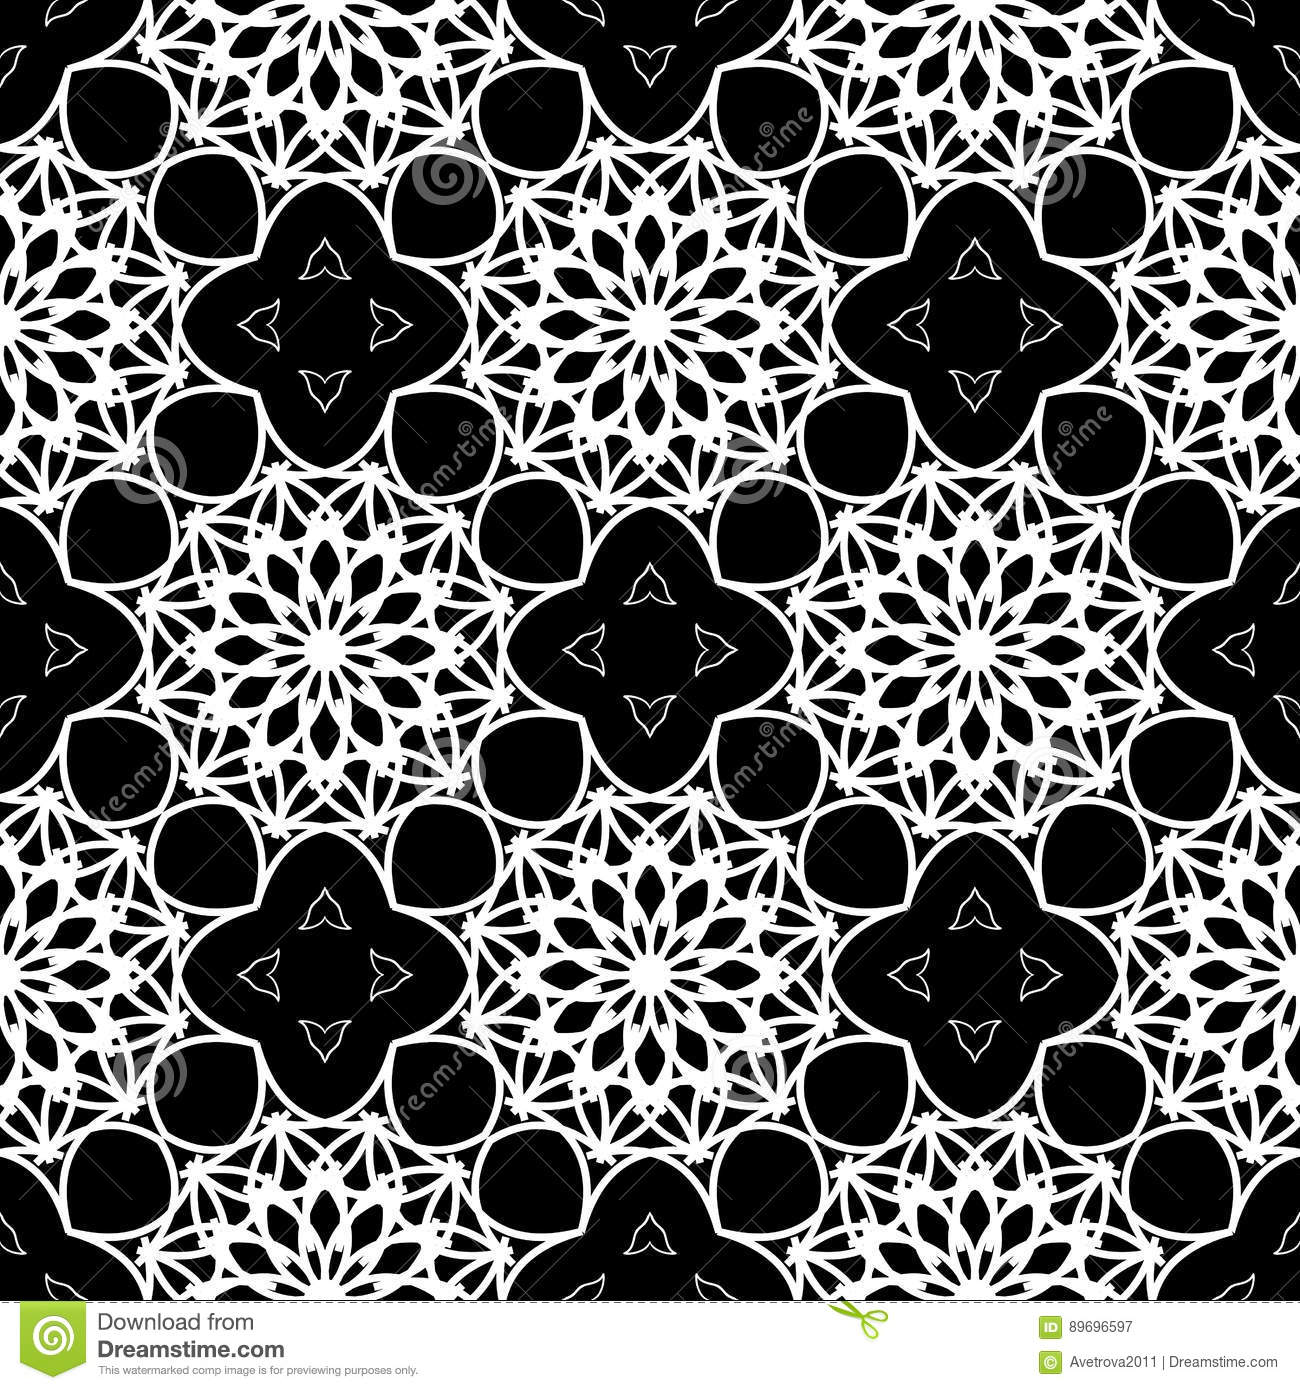 Intricate black and white pattern. Abstract lace-like seamless background.  Repeating monochromatic pattern. Vector